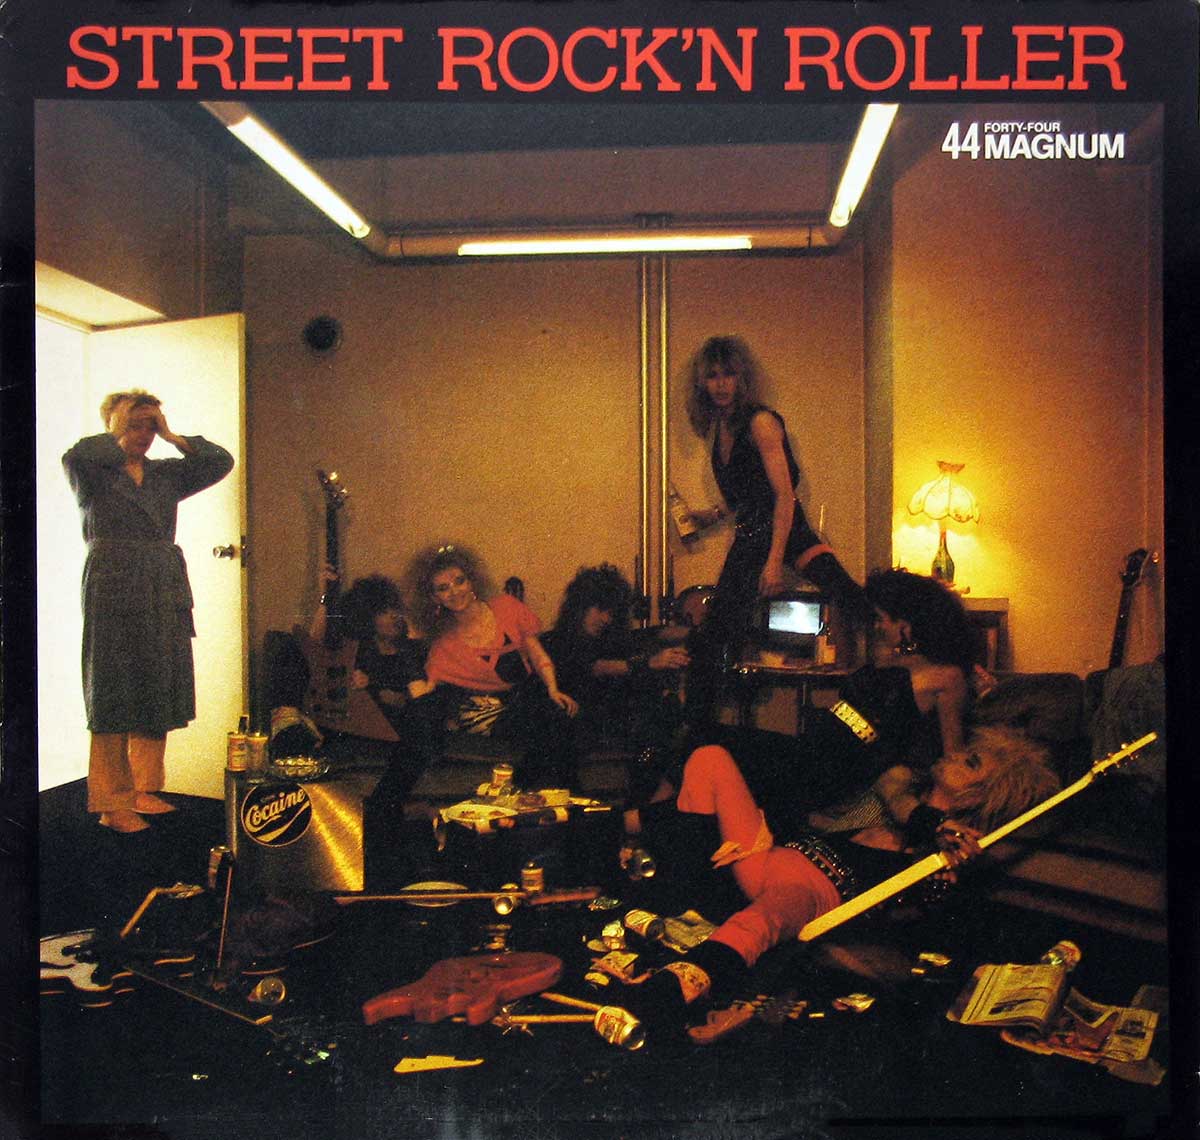 large album front cover photo of: 44 MAGNUM STREET ROCK 'N ROLLER  